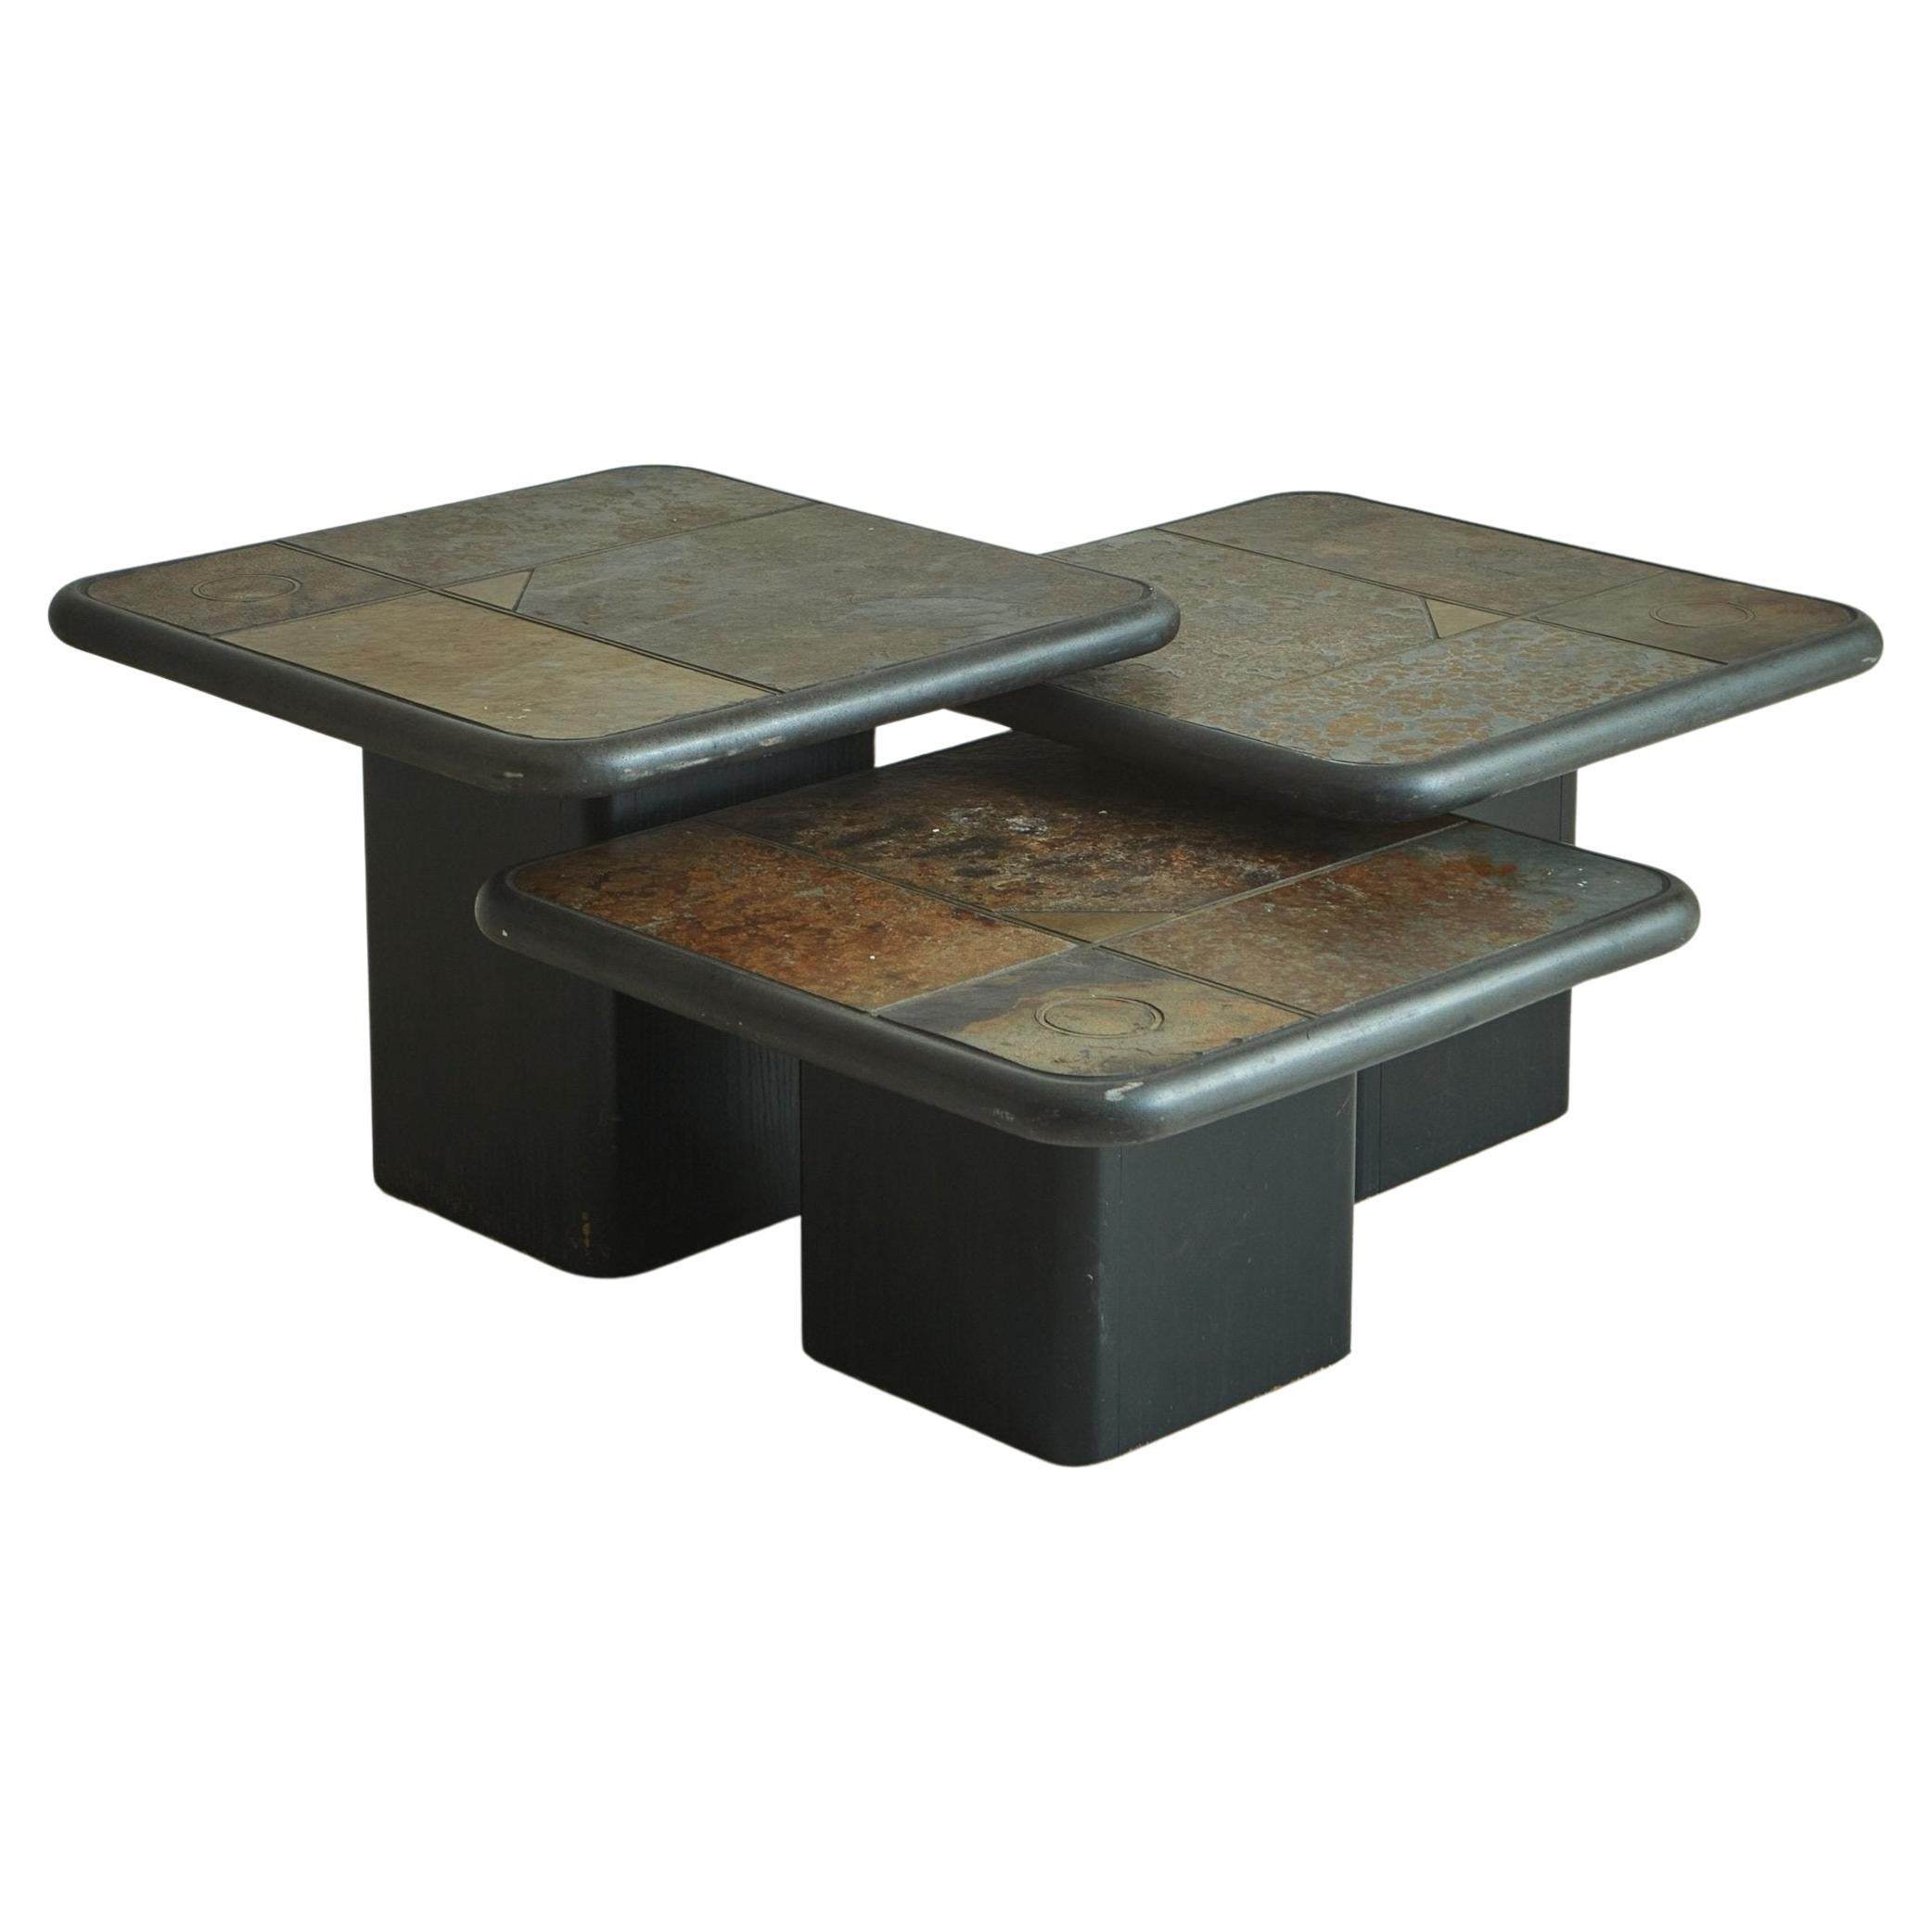 Trio of Brutalist Mosaic Wood Base Nesting Tables by Paul Kingma for Kneip